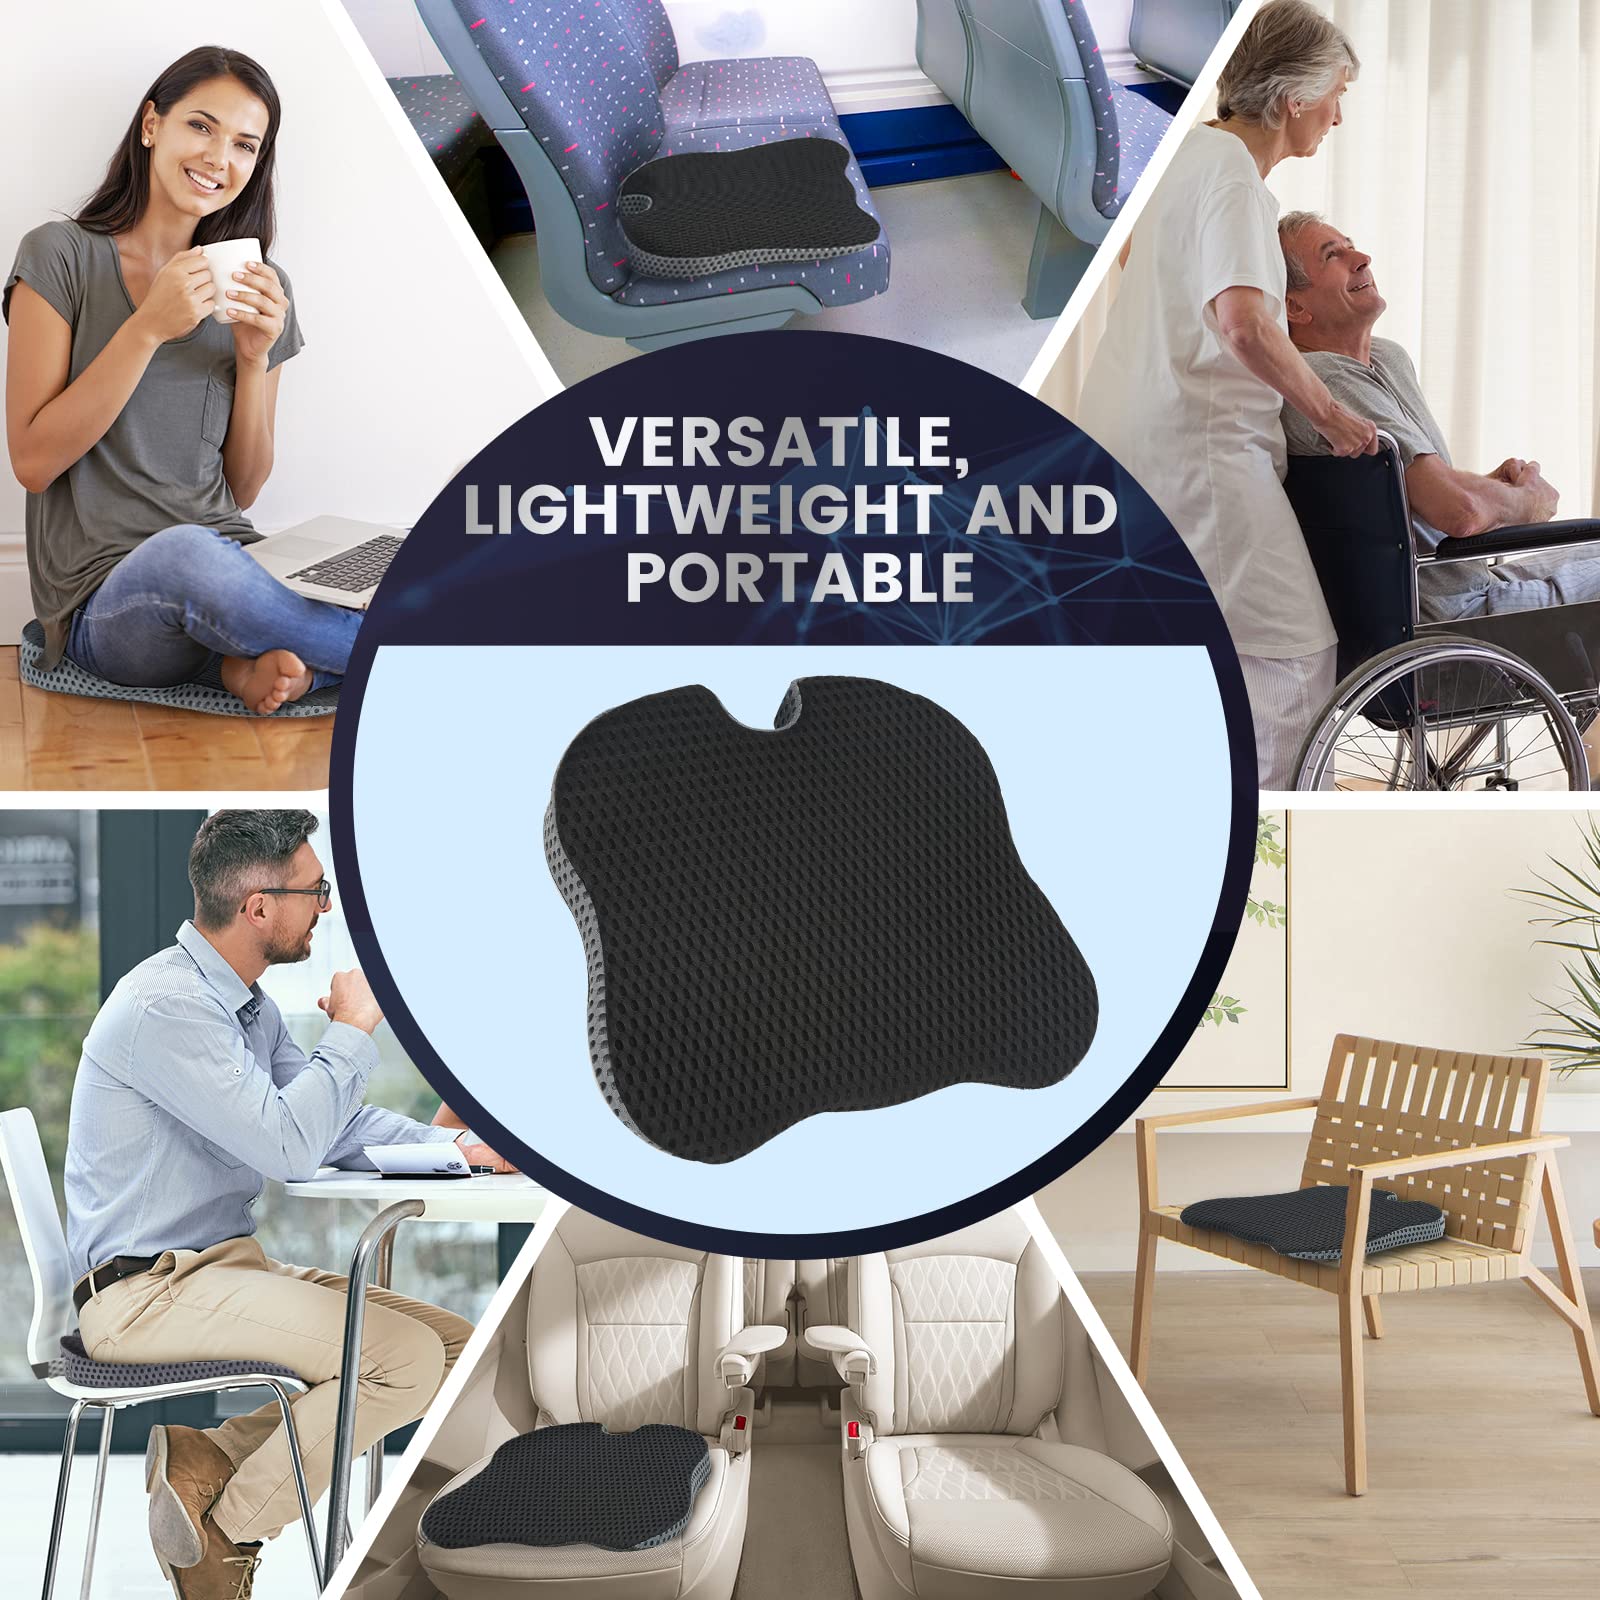 GSPSCN Car Seat Cushion Pad Memory Foam Heightening Wedge,Driver Seat Cushion Pillow to Relief Sciatica & Back Coccyx Tailbone Pain in Office Chairs,Car Seat,Wheelchair,Computer Desk Chair